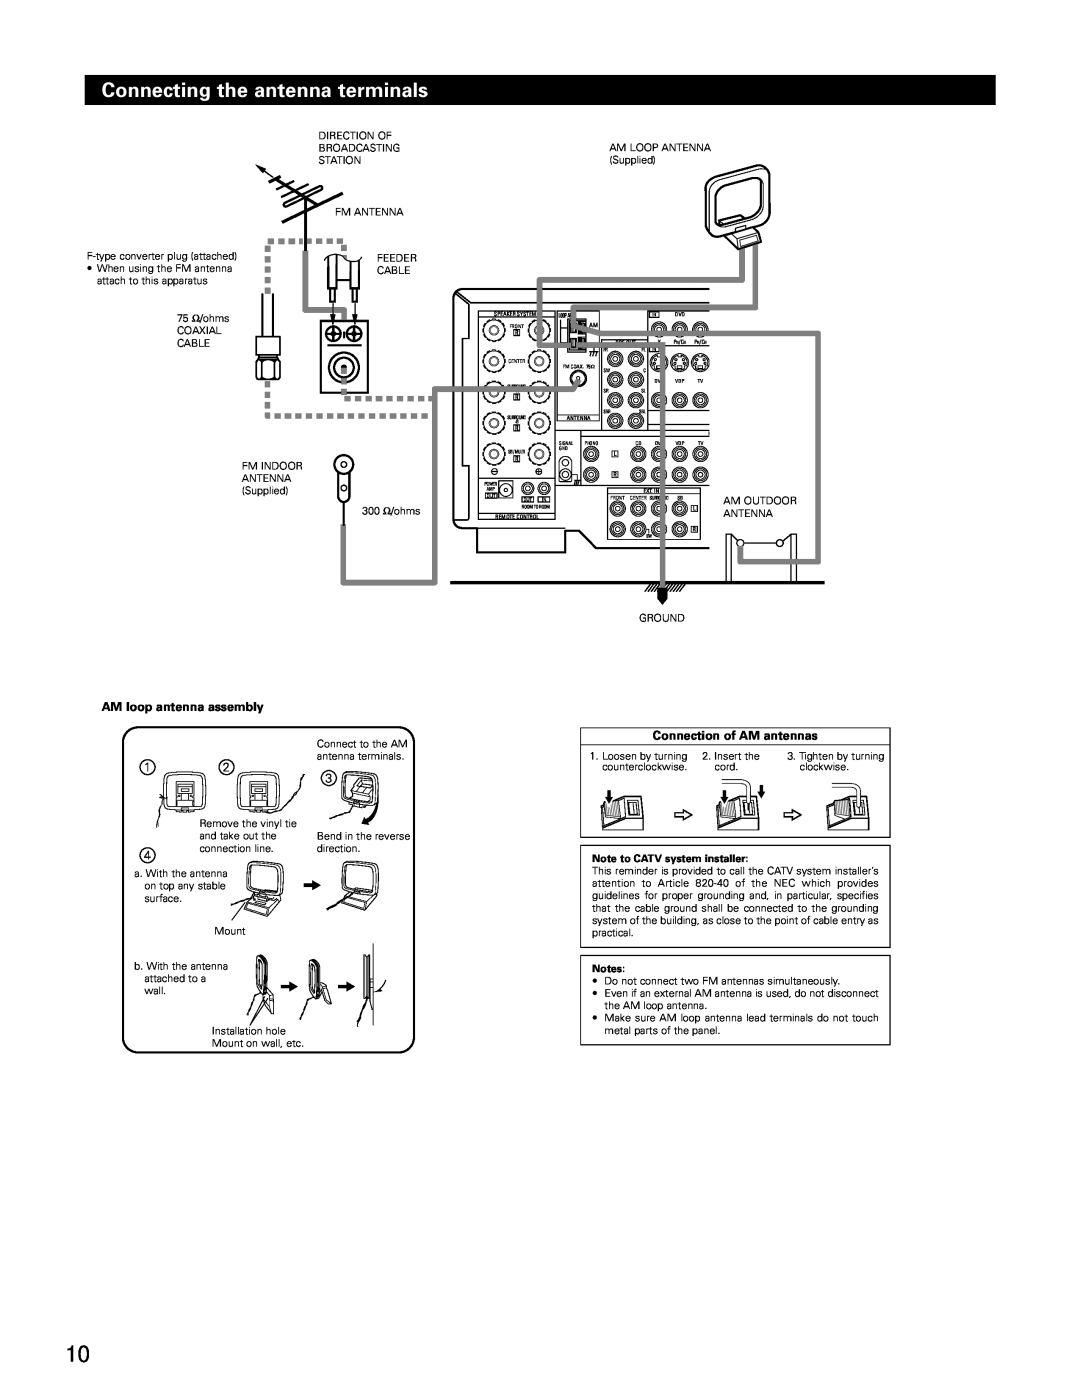 Denon AVR-4802 manual Connecting the antenna terminals, AM loop antenna assembly, Connection of AM antennas, Notes 